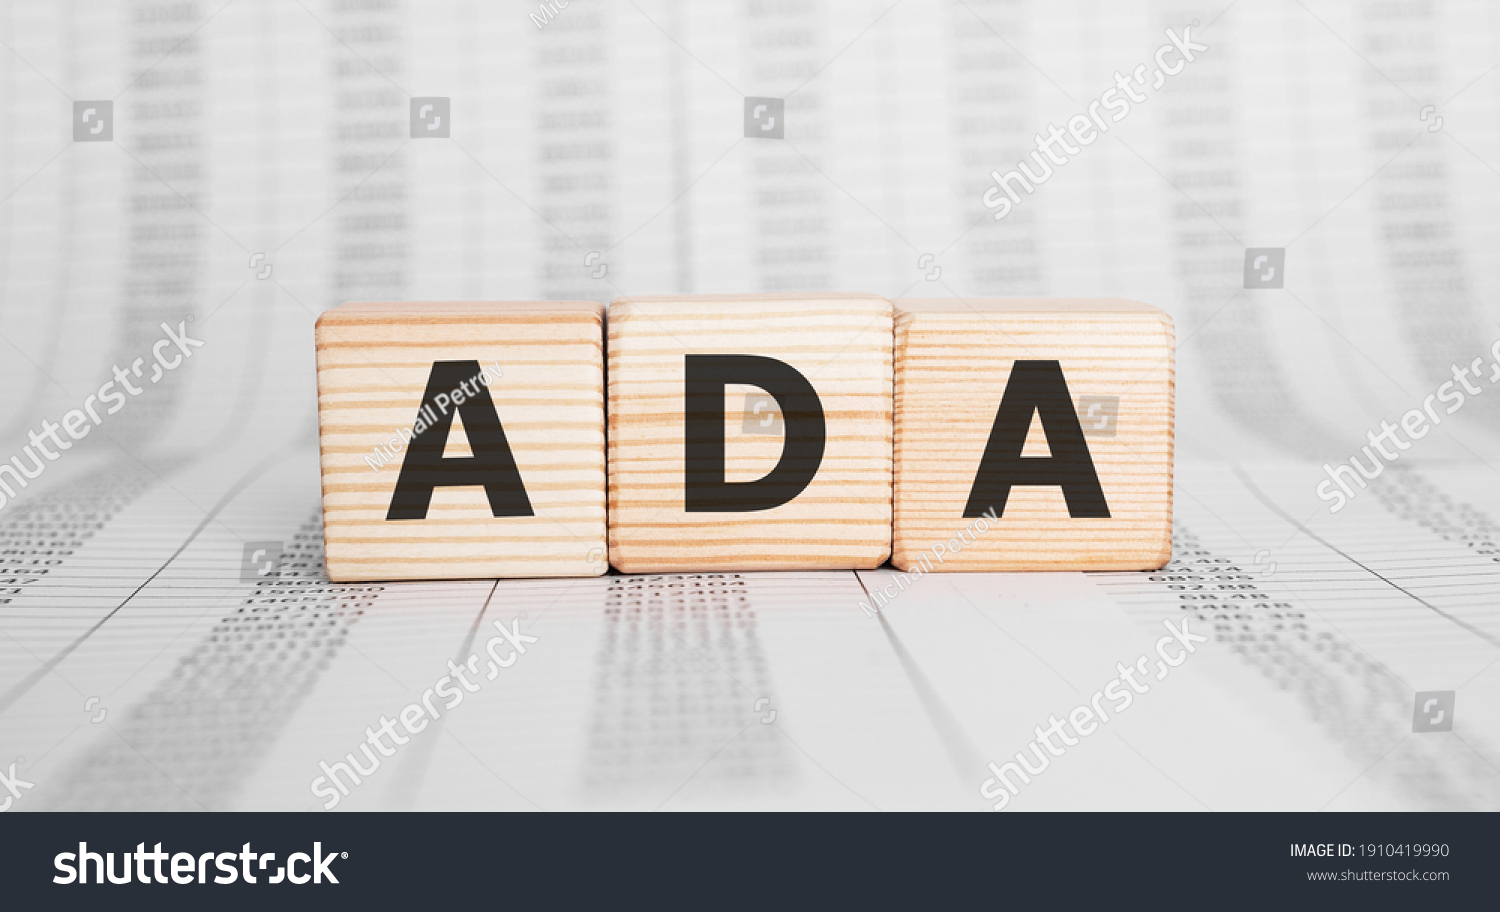 Word ADA made with wood building blocks, business concept. #1910419990